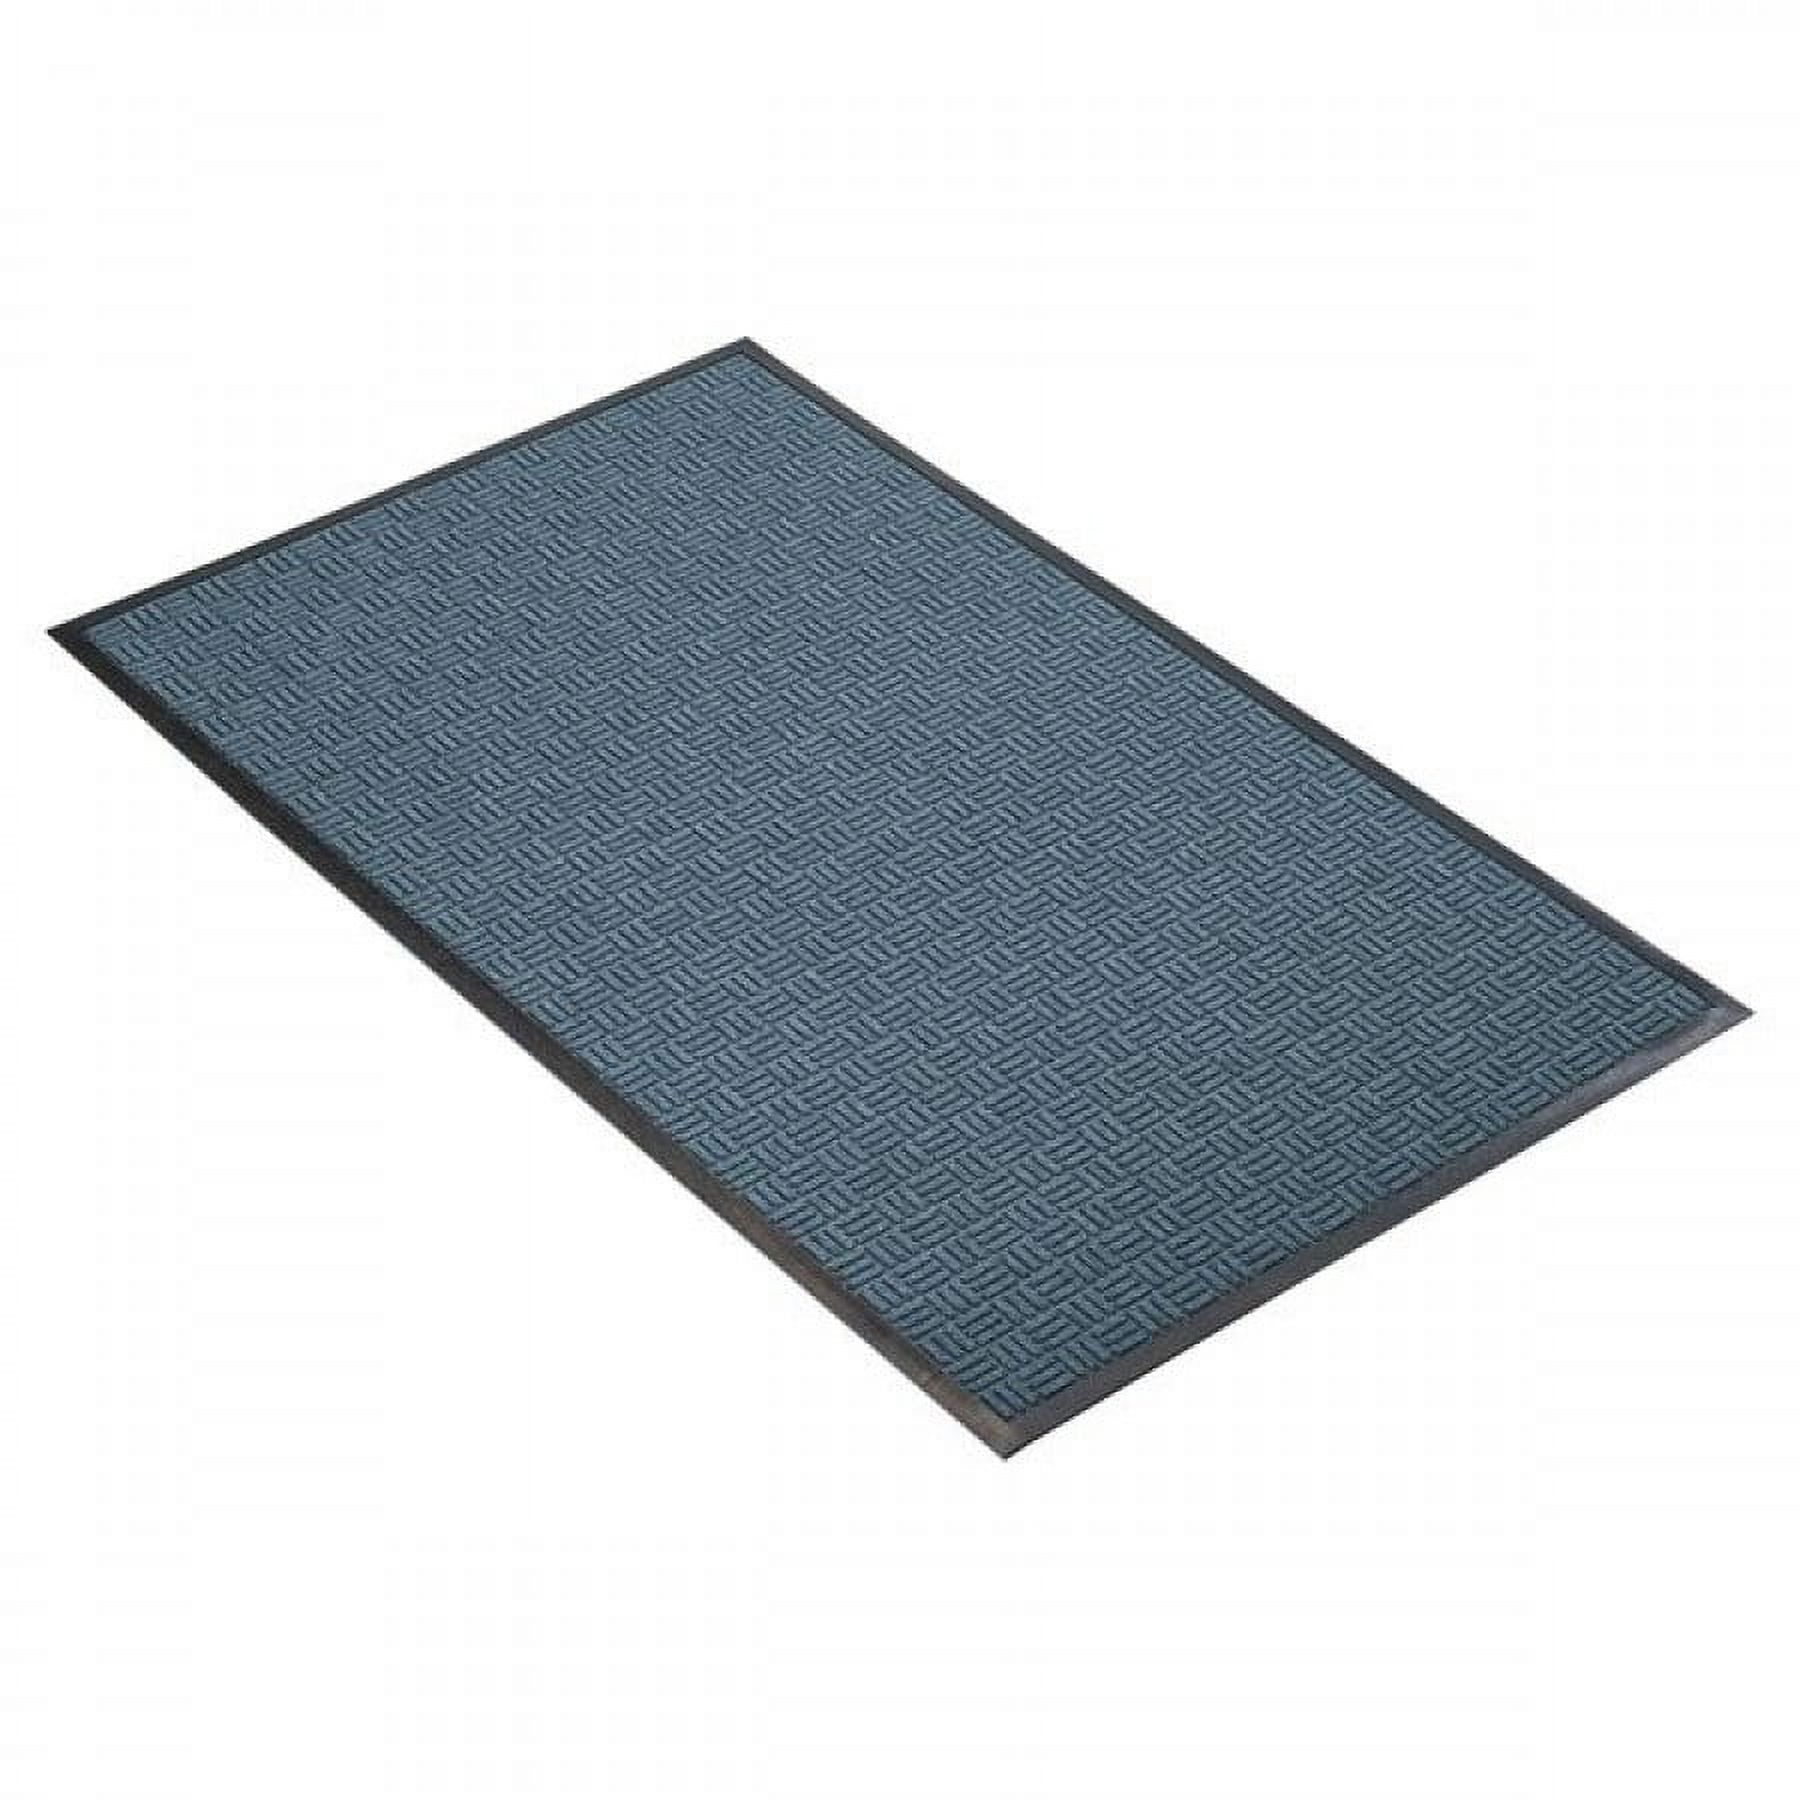 Notrax Carpeted Entrance Mat,Blue,3ft. x 5ft.  167S0035BU - image 2 of 5